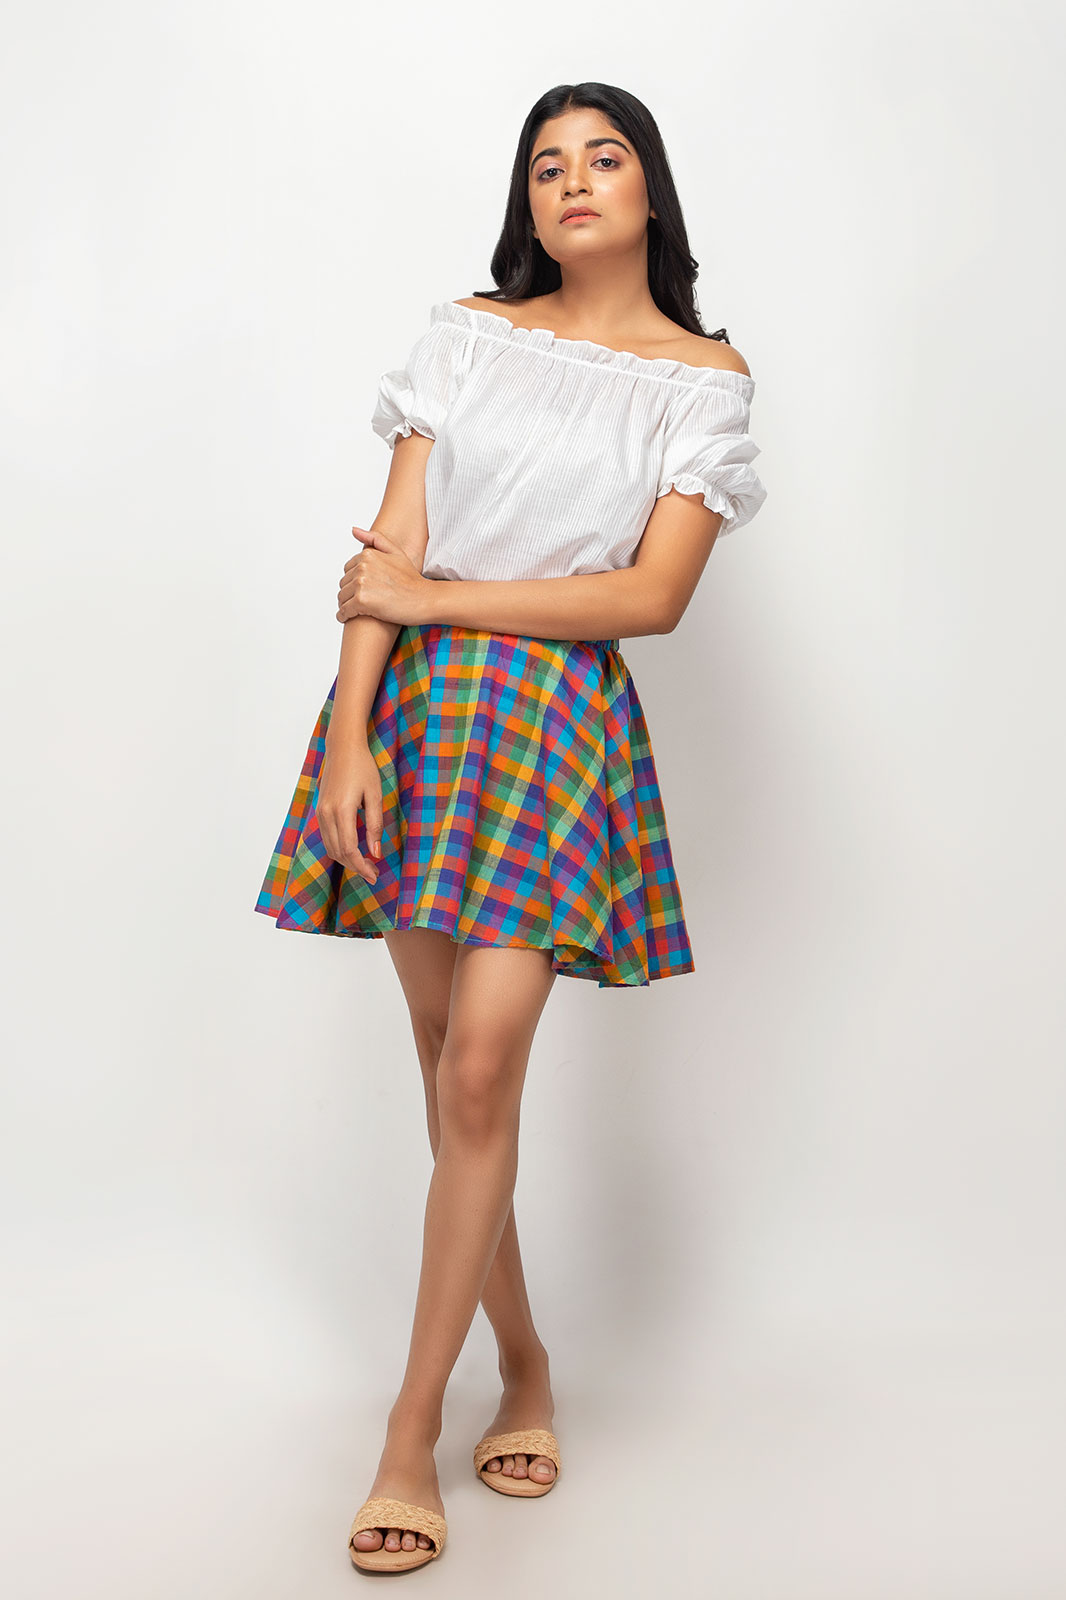 Cotton short skirt, printed cotton skirt, wrap skirt, casual skirt, cotton skirts for women, cotton skirt design, sustainable cotton brand, organic clothing brand, women clothing brand, slow fashion brand, handmade clothing brand, handwoven clothing brand, Online clothing store, sepia stories